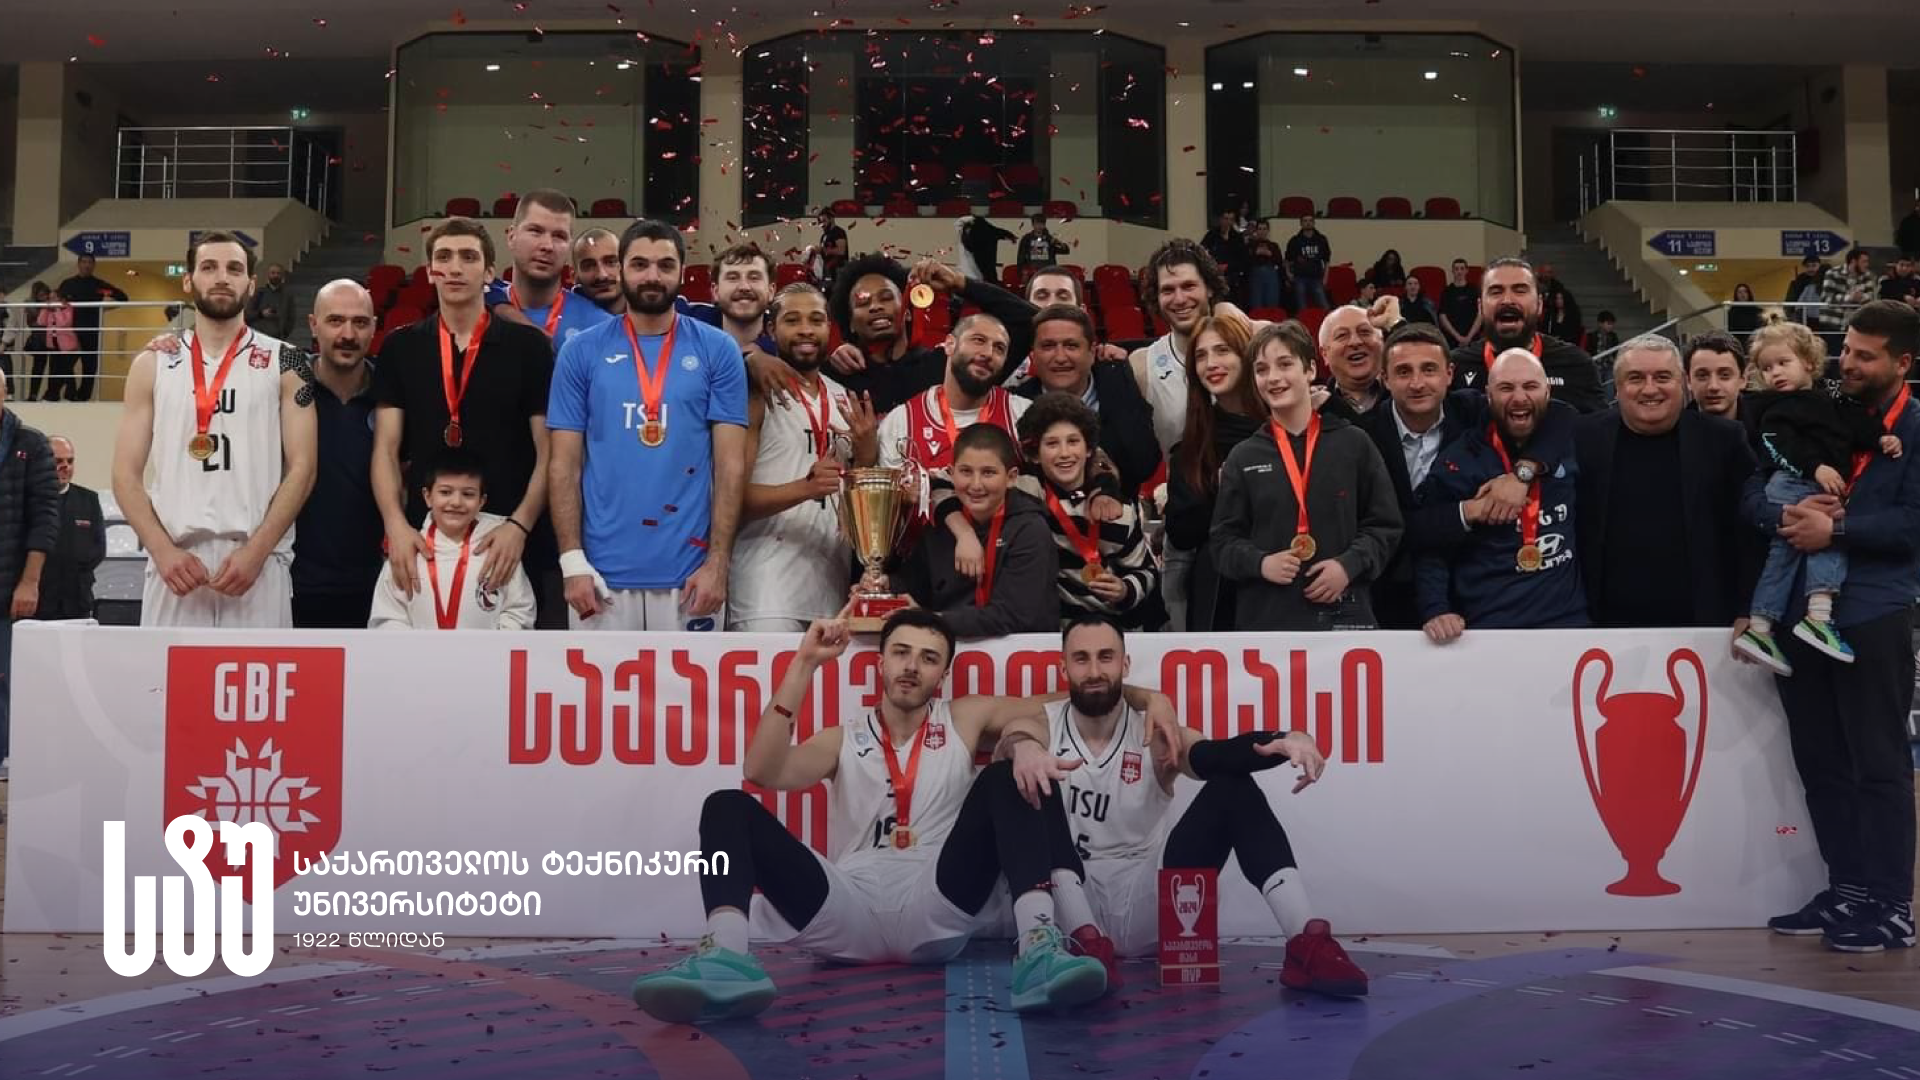 The Rector of the Technical University of Georgia congratulates the TSU basketball team on the victory